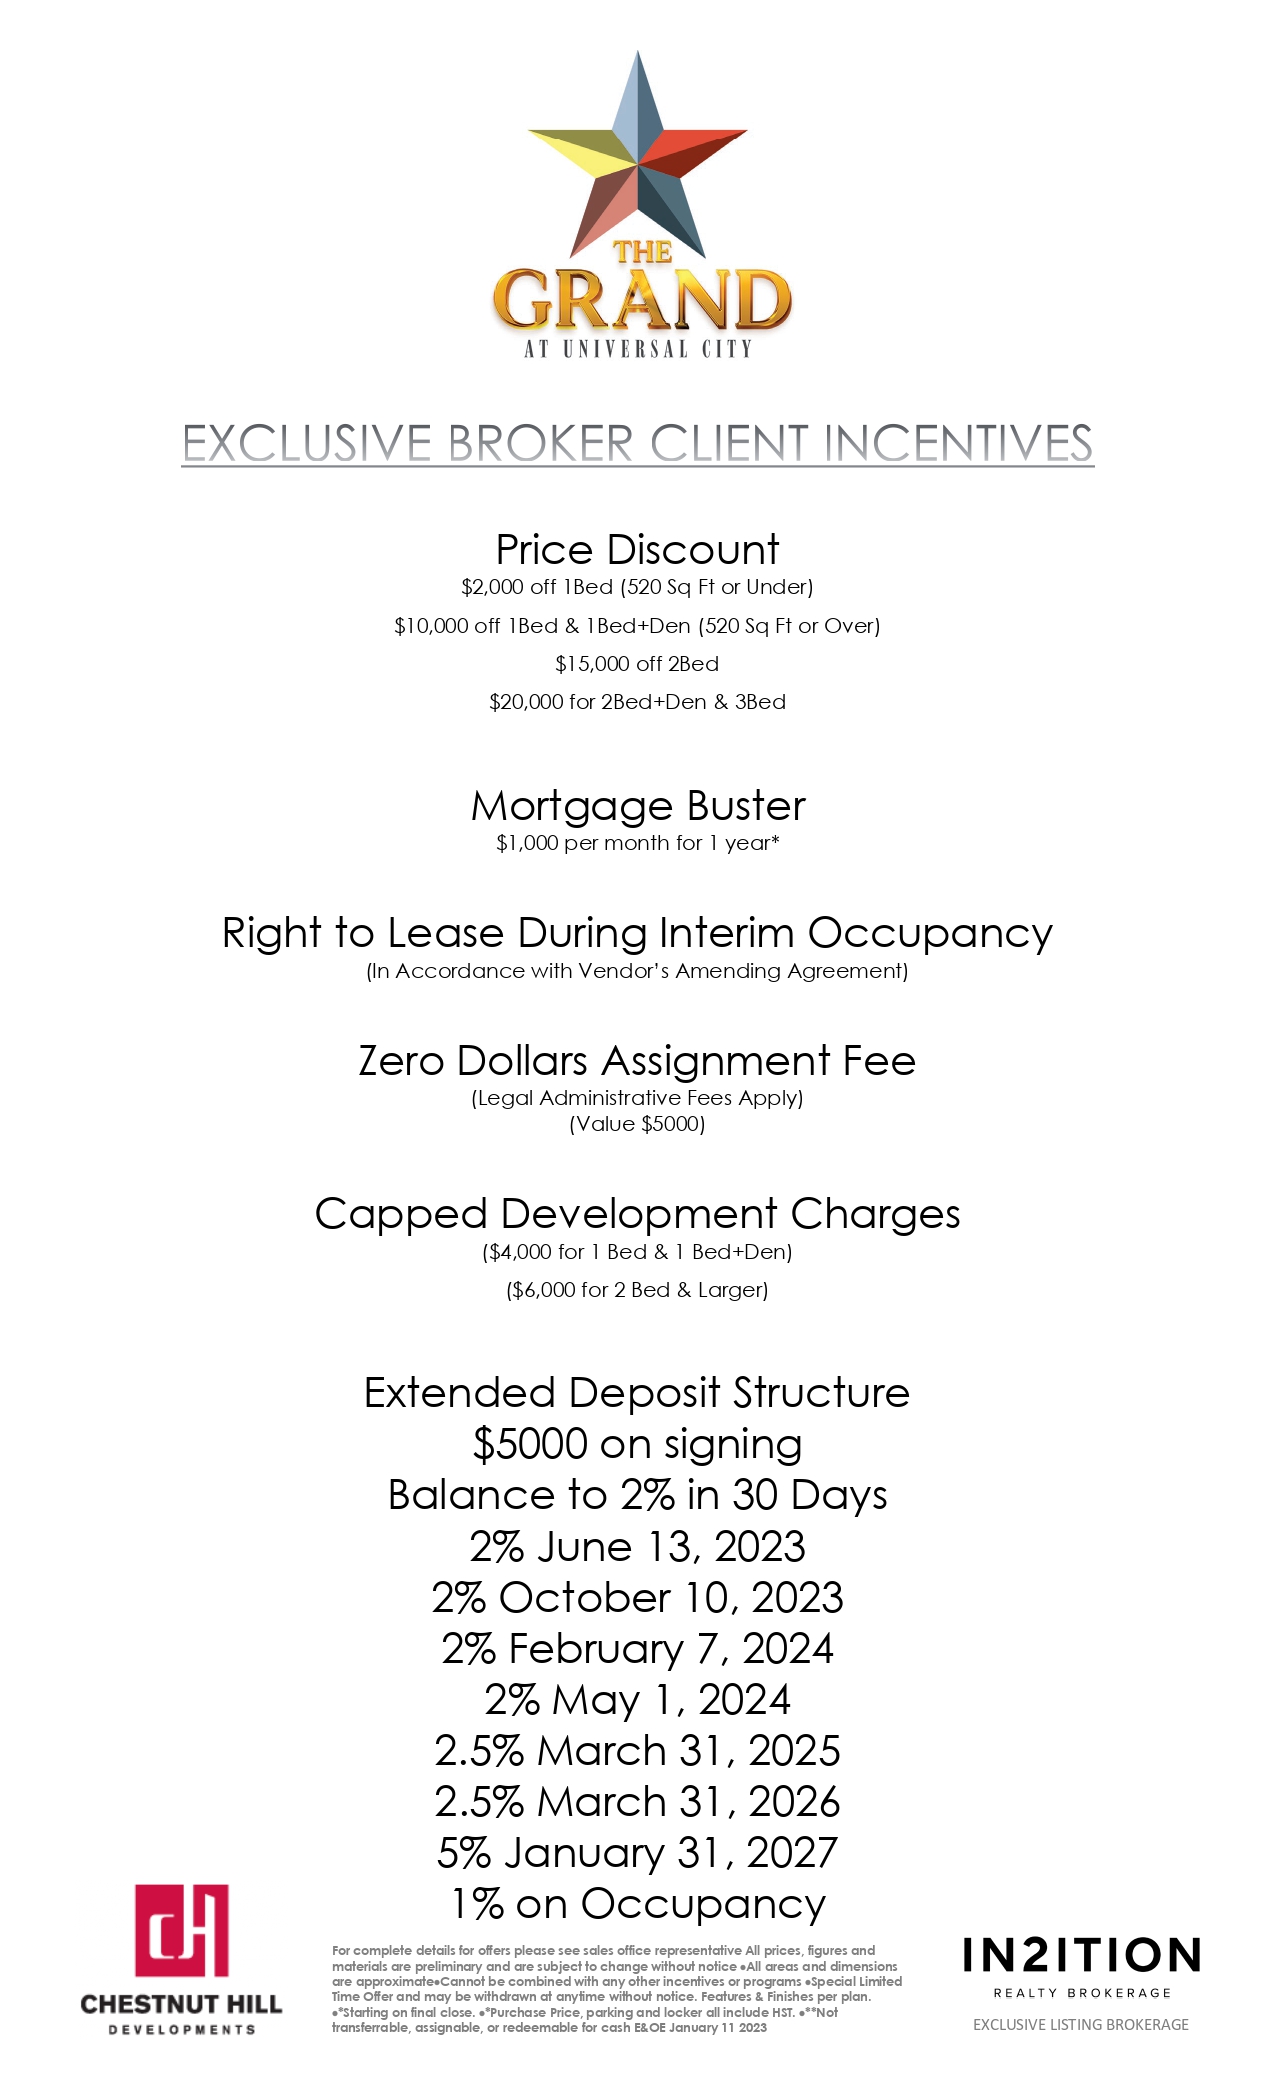 Exclusive Broker Client Incentives